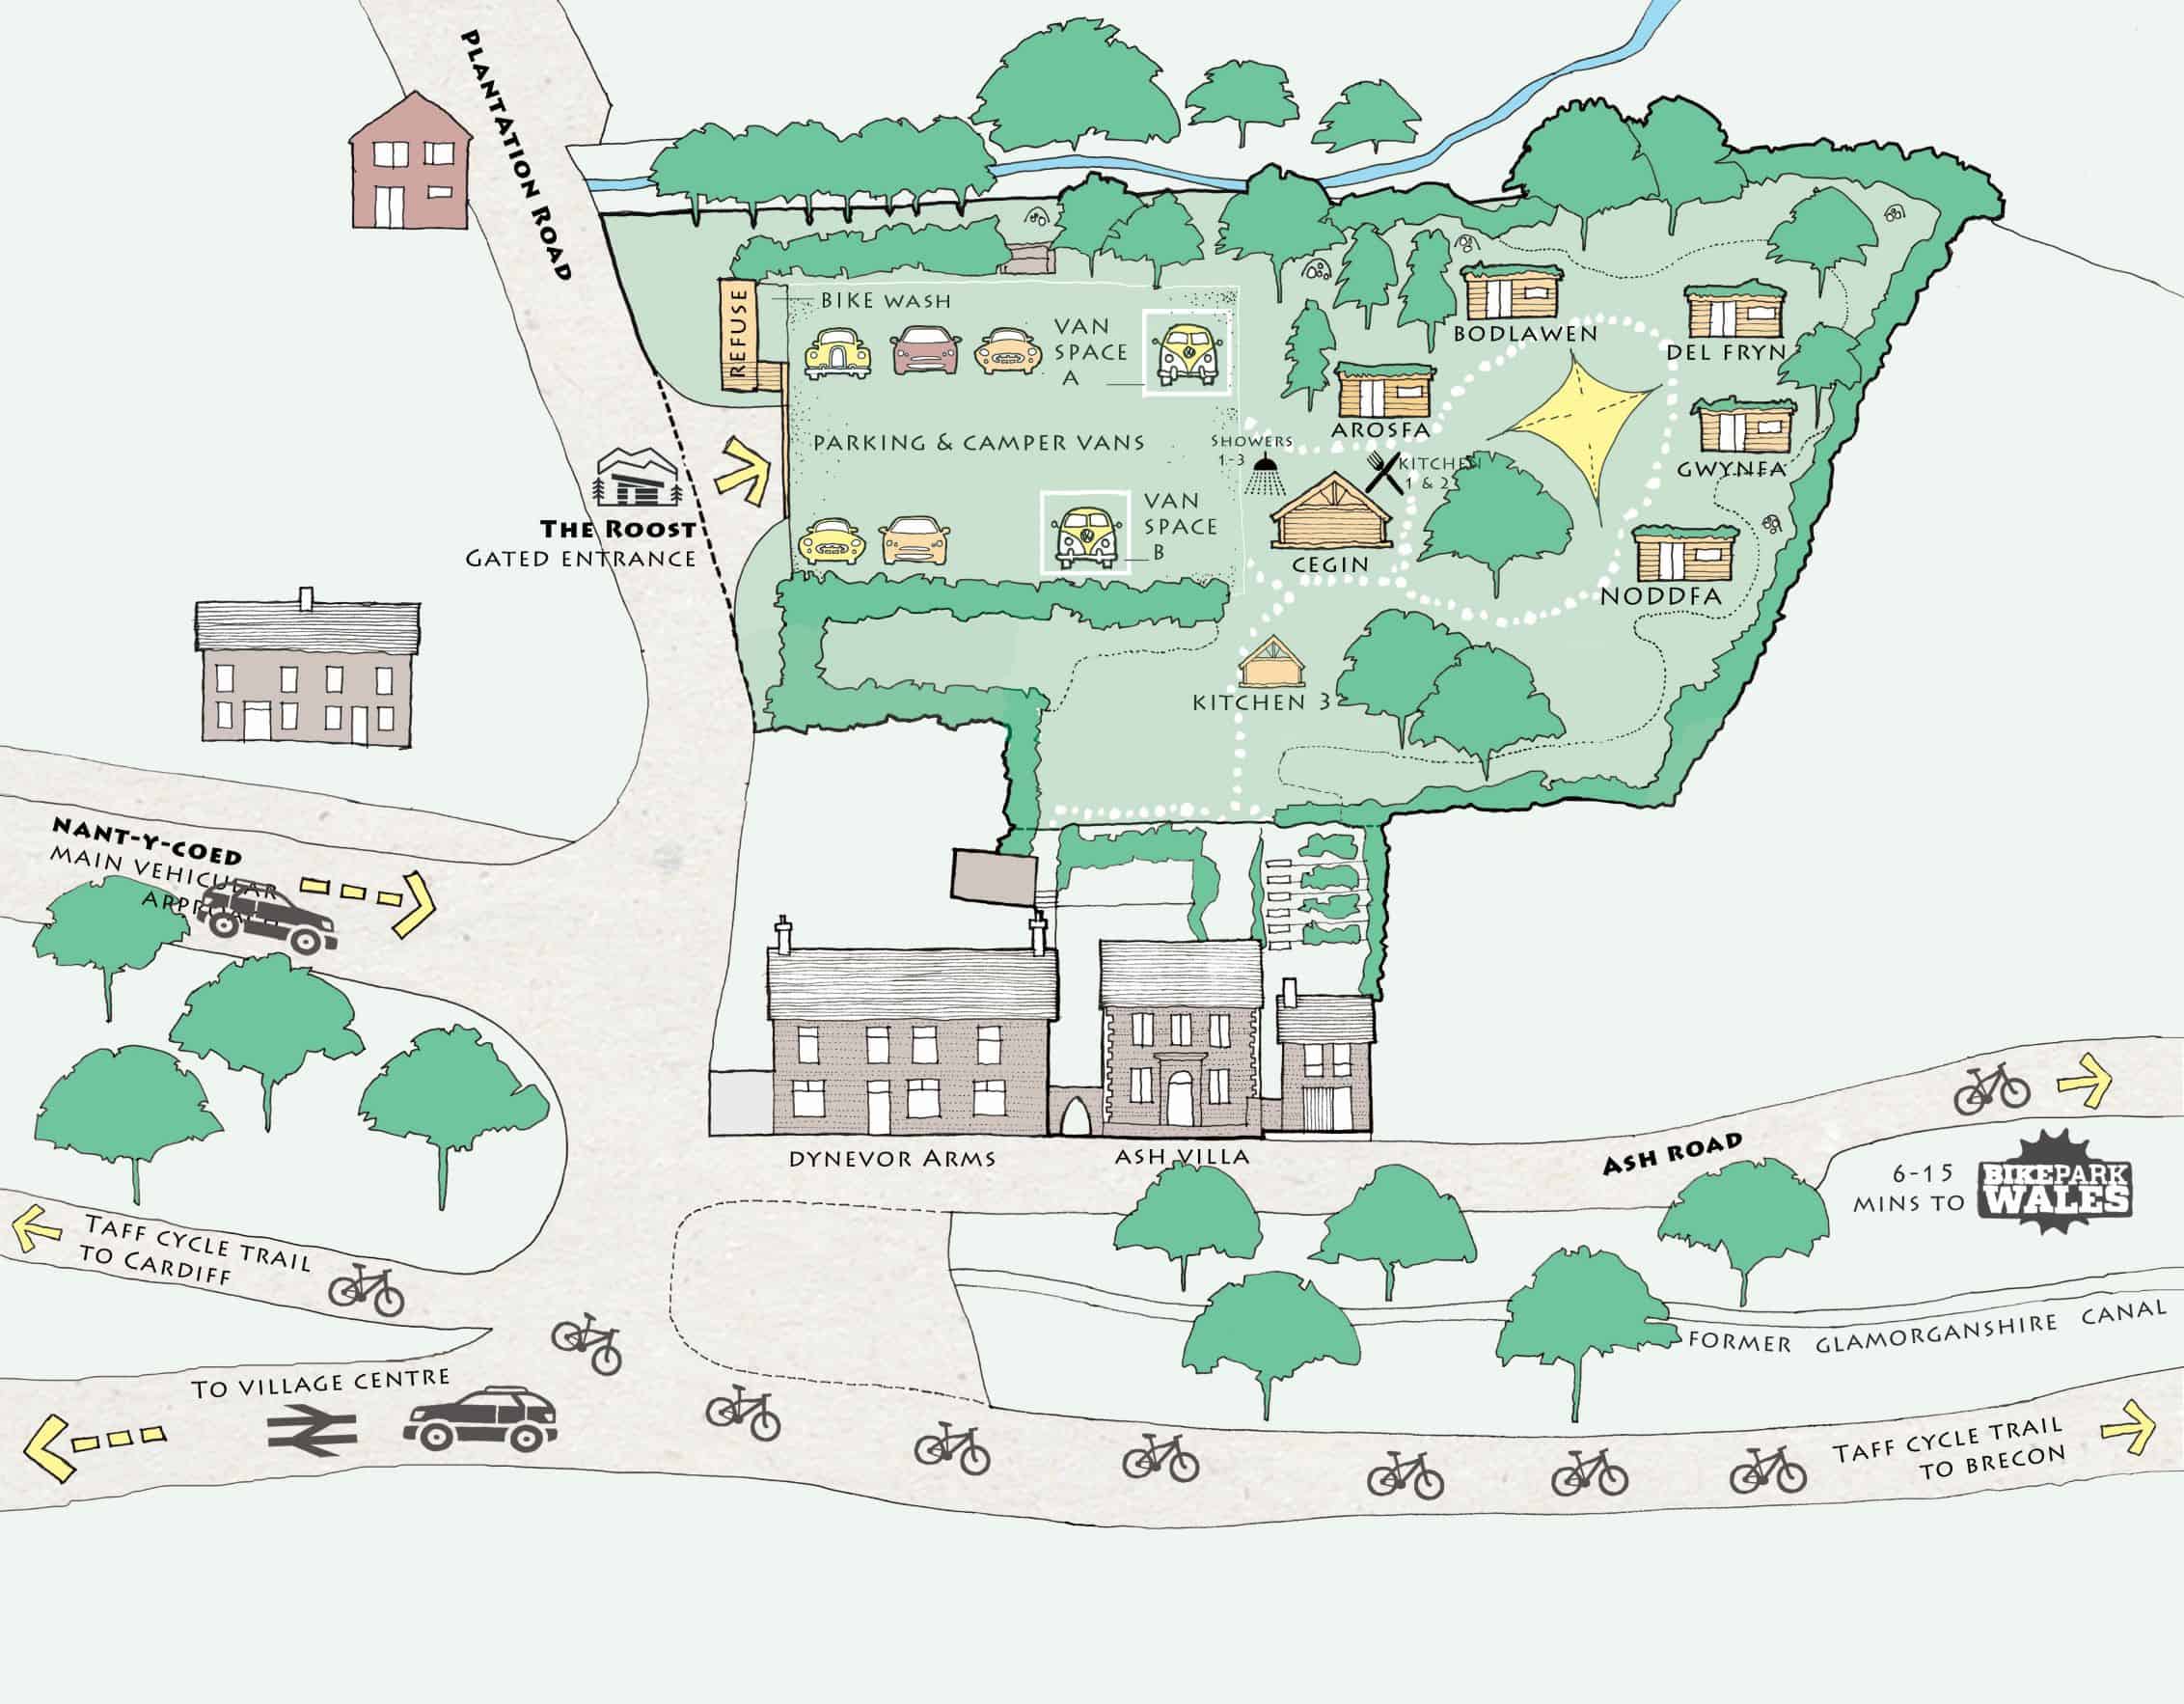 Roost site map showing cabins and way to bikepark wales